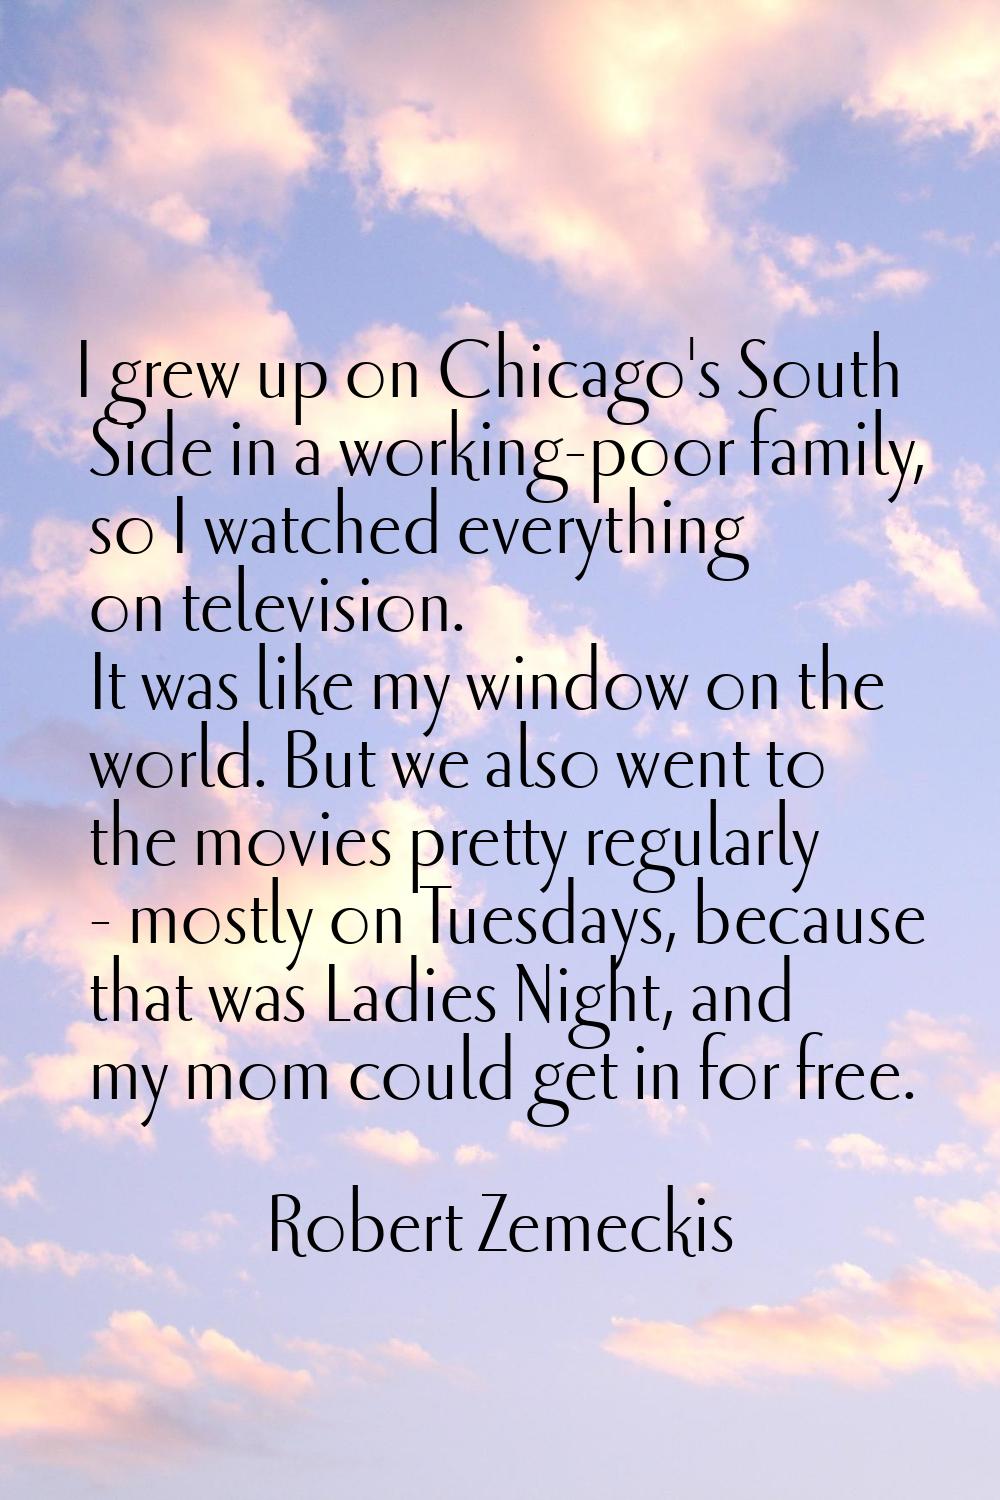 I grew up on Chicago's South Side in a working-poor family, so I watched everything on television. 